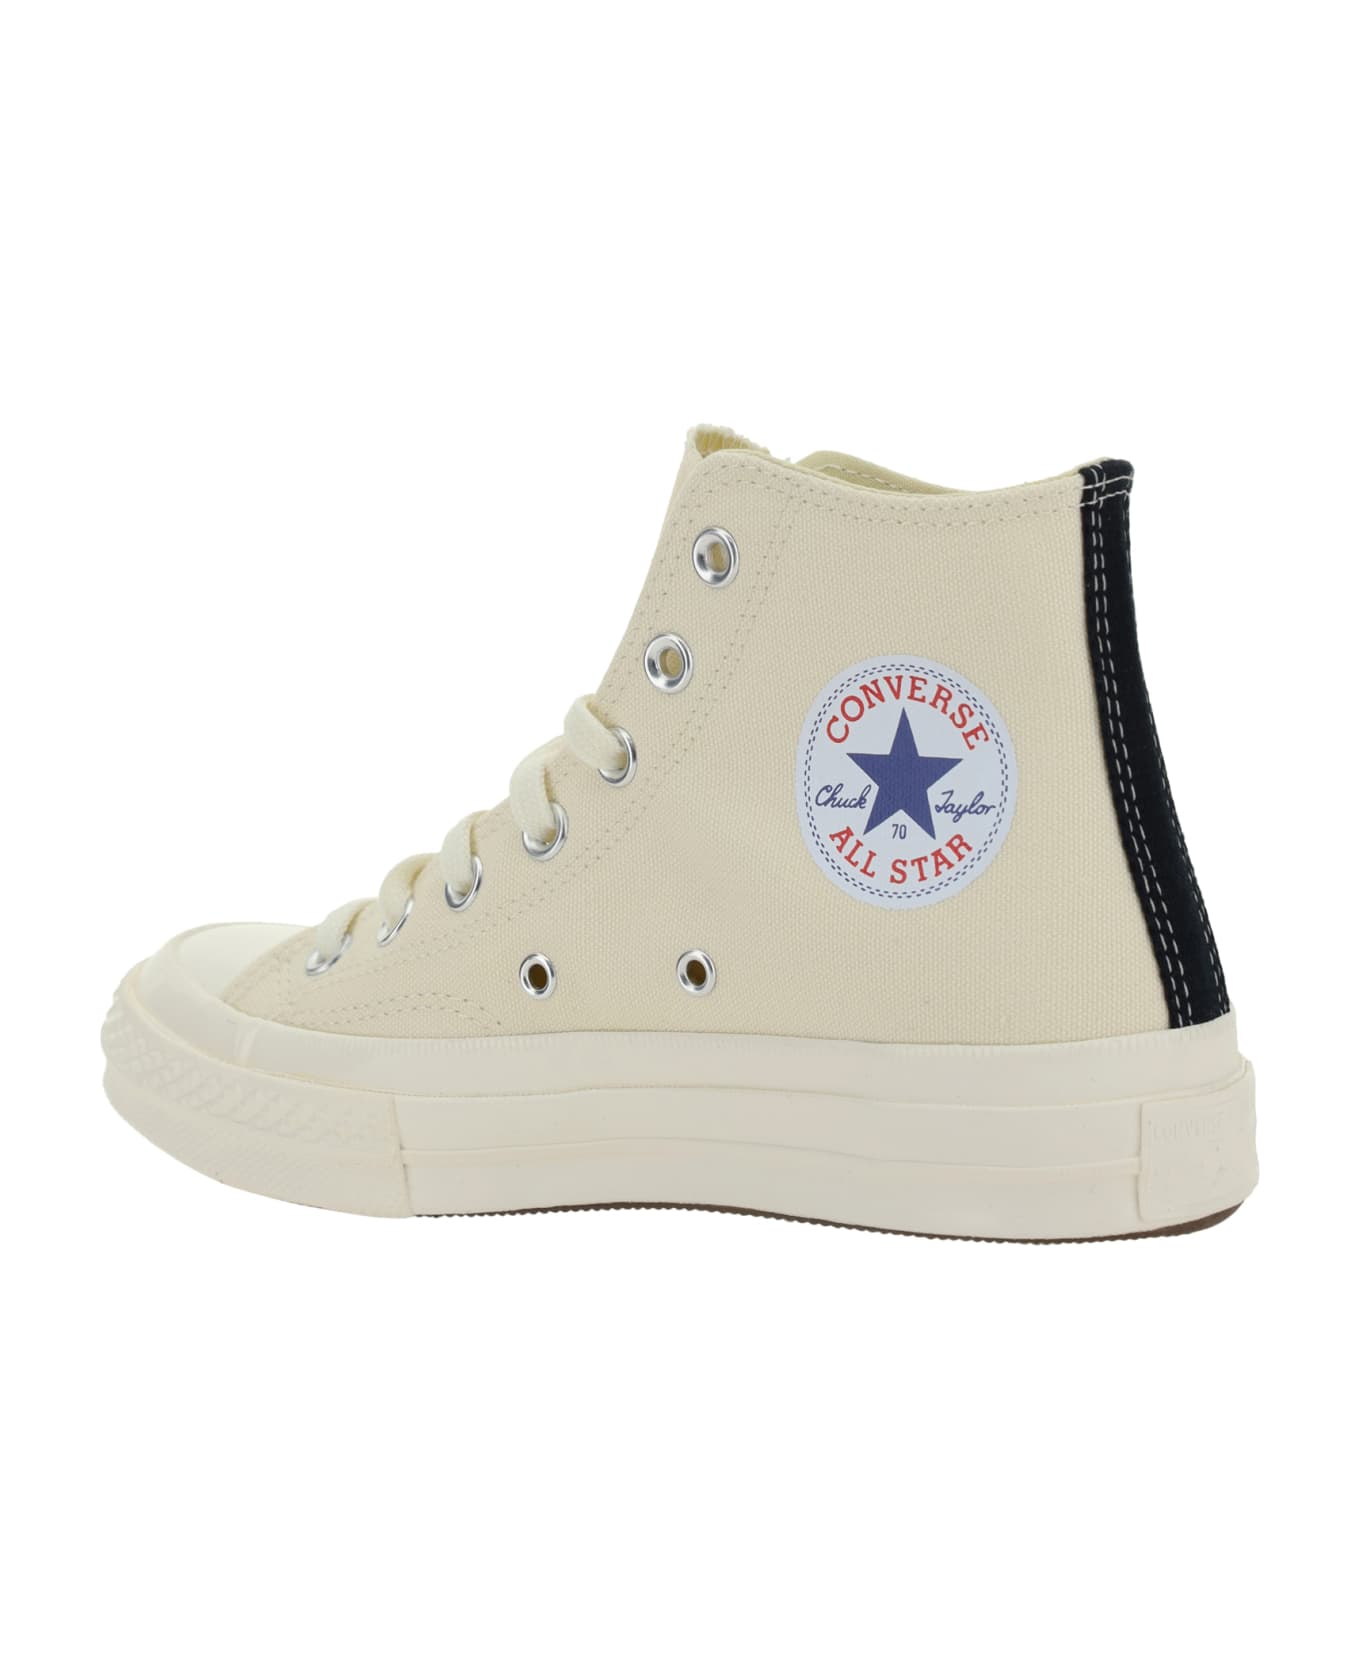 Comme des Garçons Play High Chuck Taylor Sneakers - White